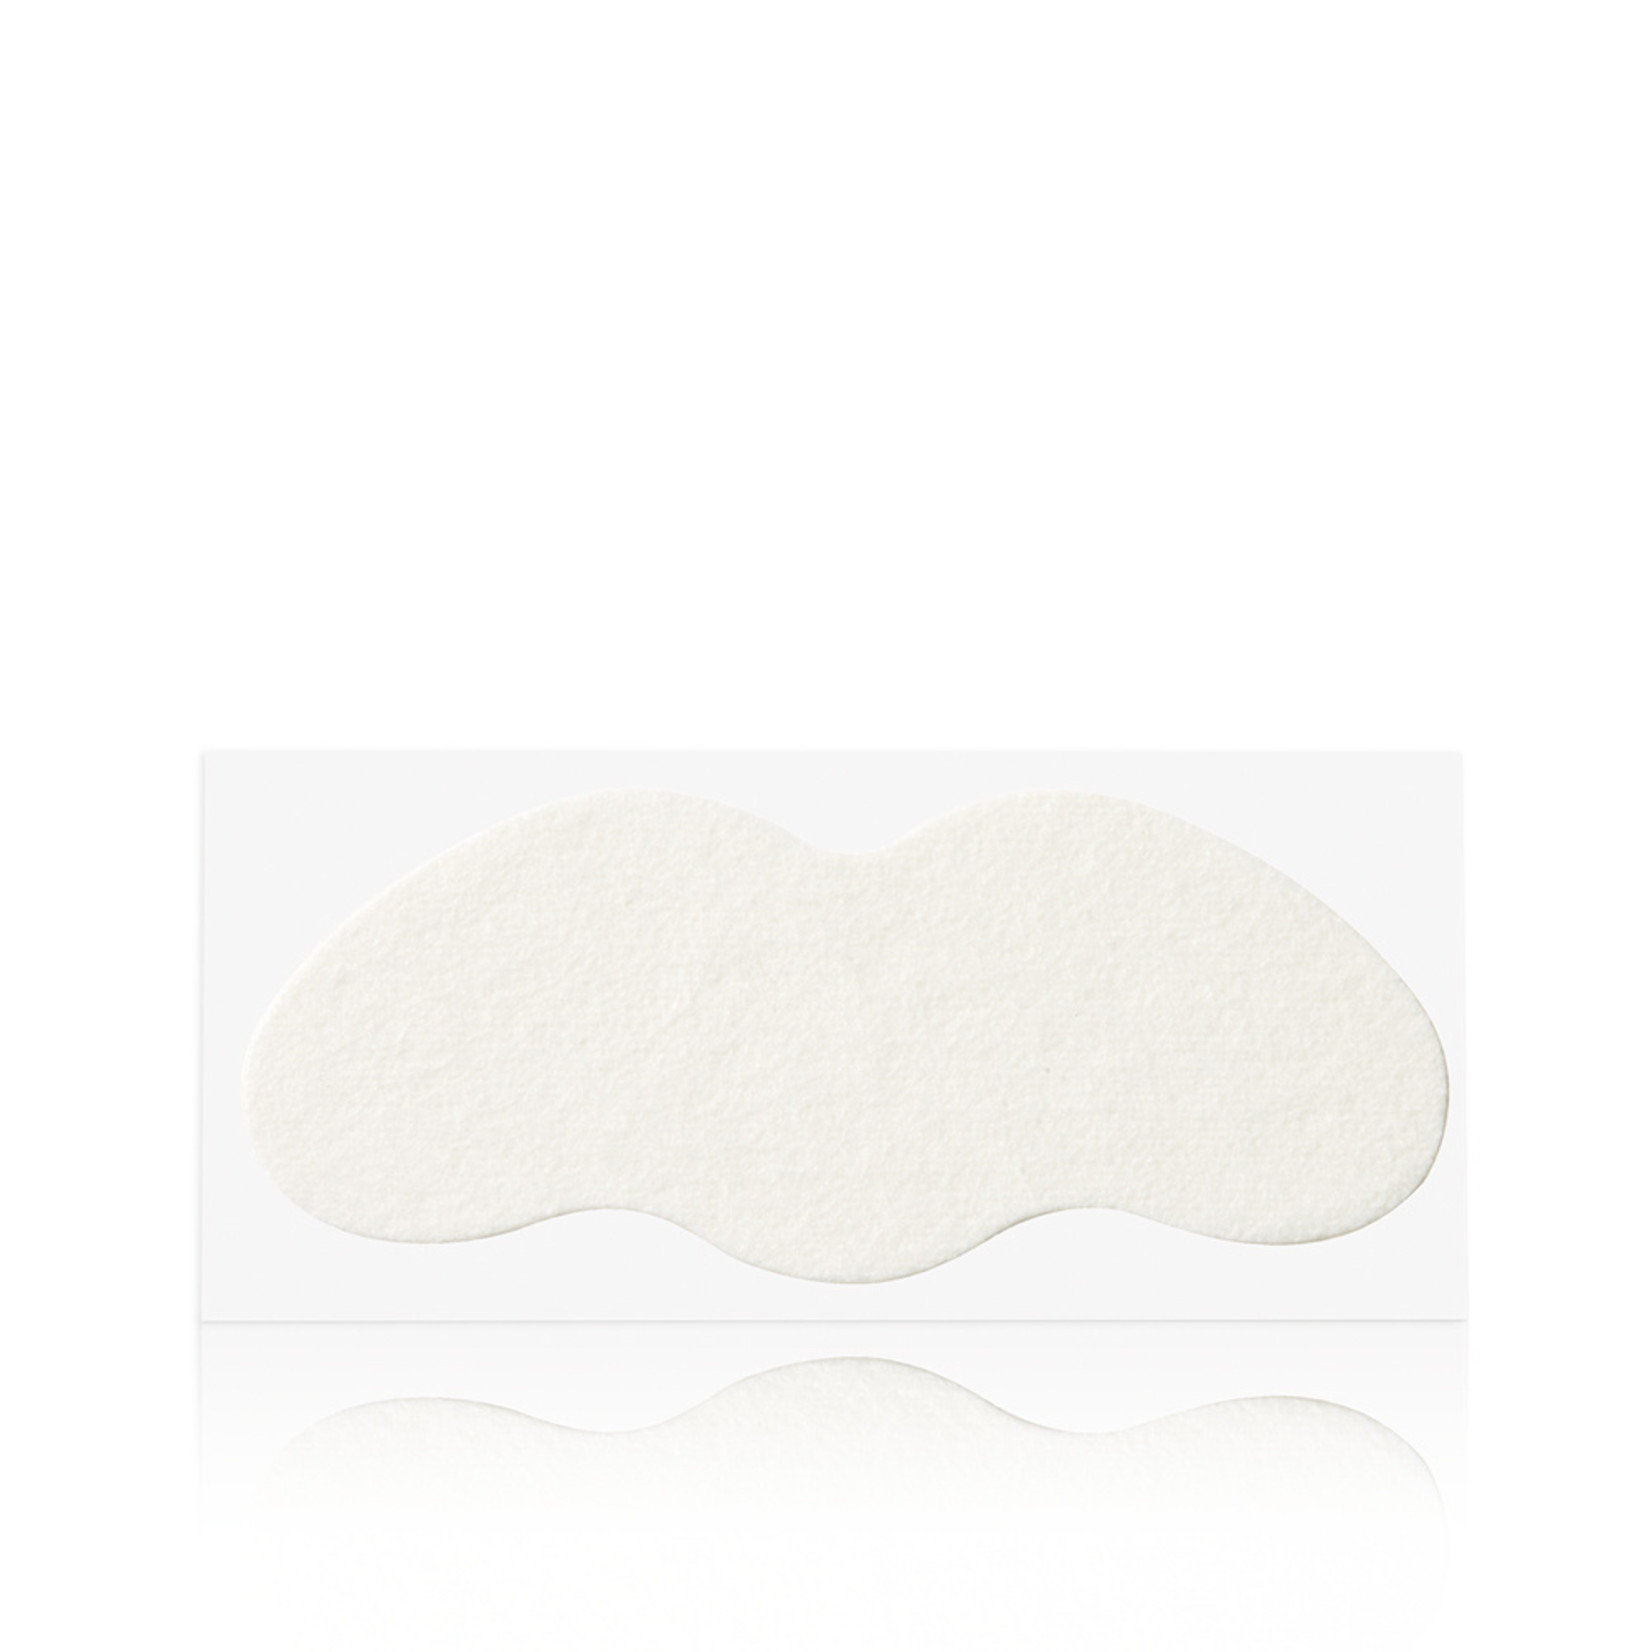 YADAH Perfect Cleansing Nose Strip